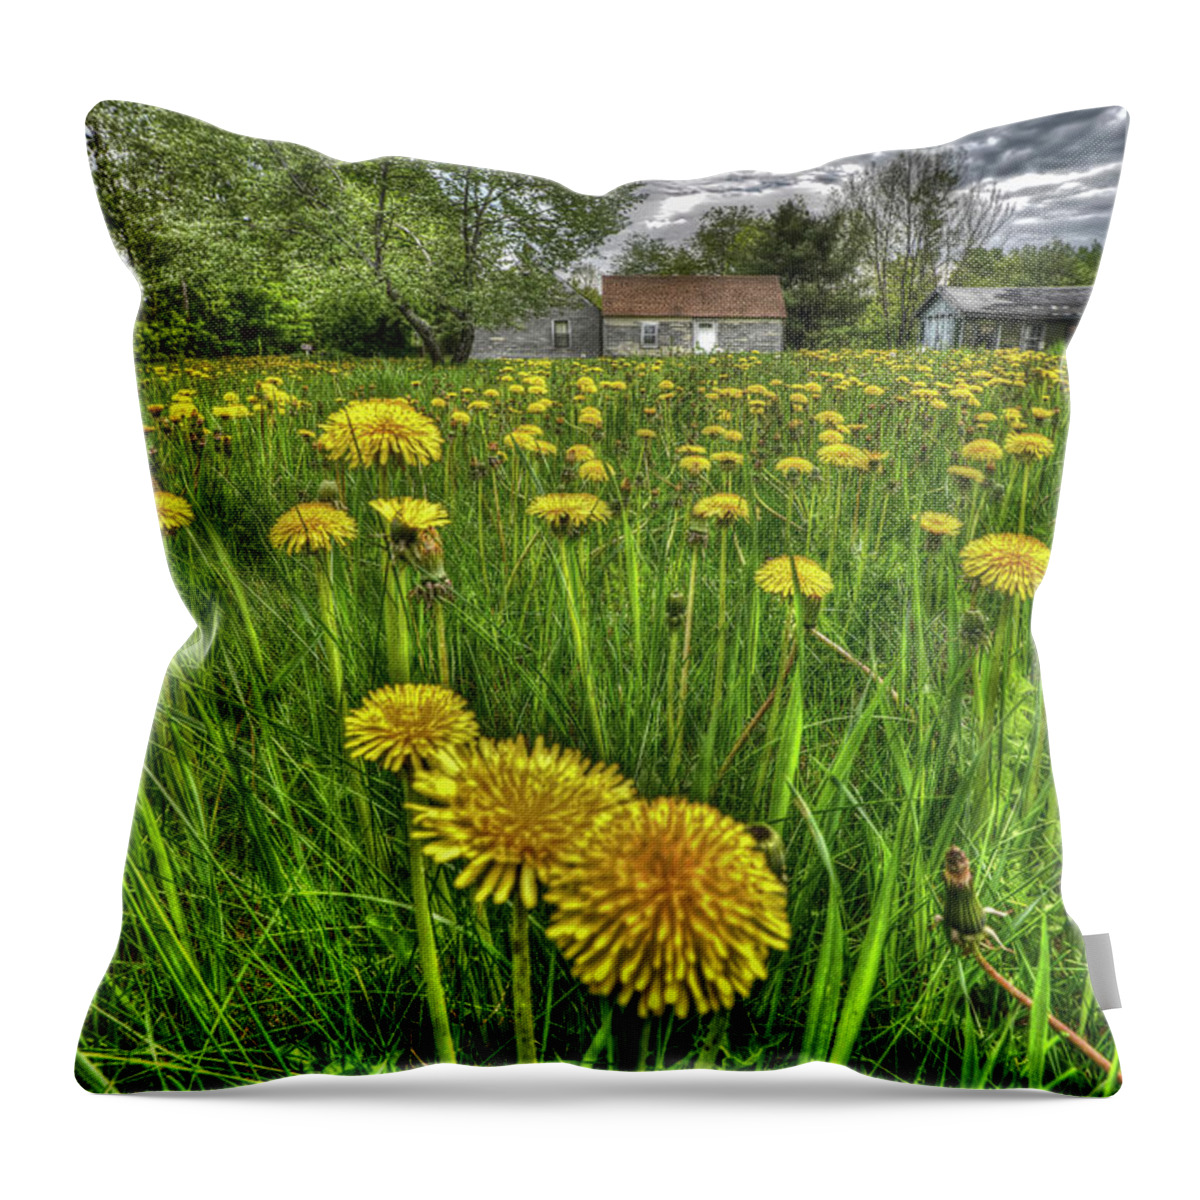 Dandelions Throw Pillow featuring the photograph Dlion Delit by Jeff Cooper